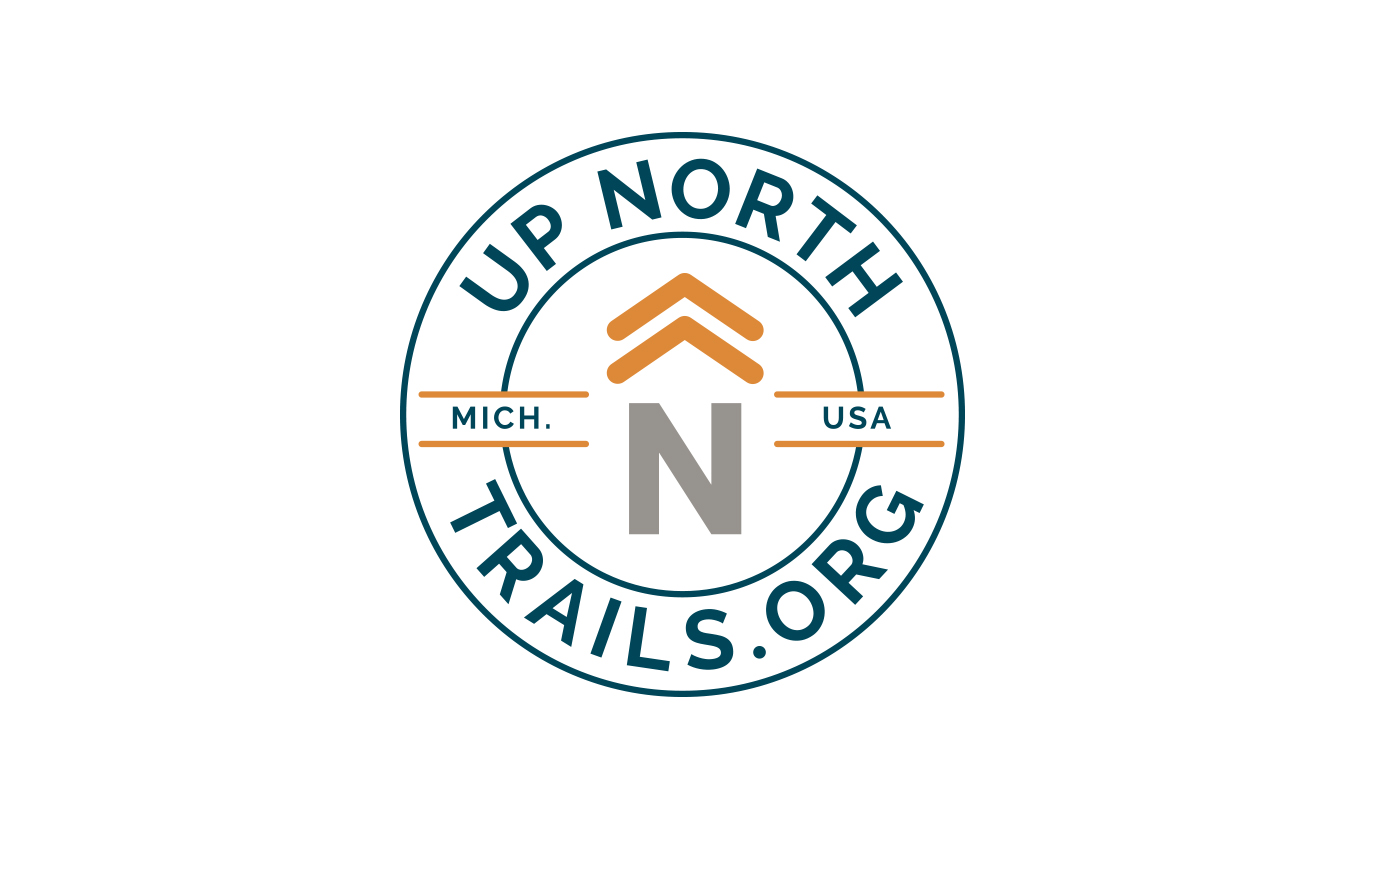 Up North Trails